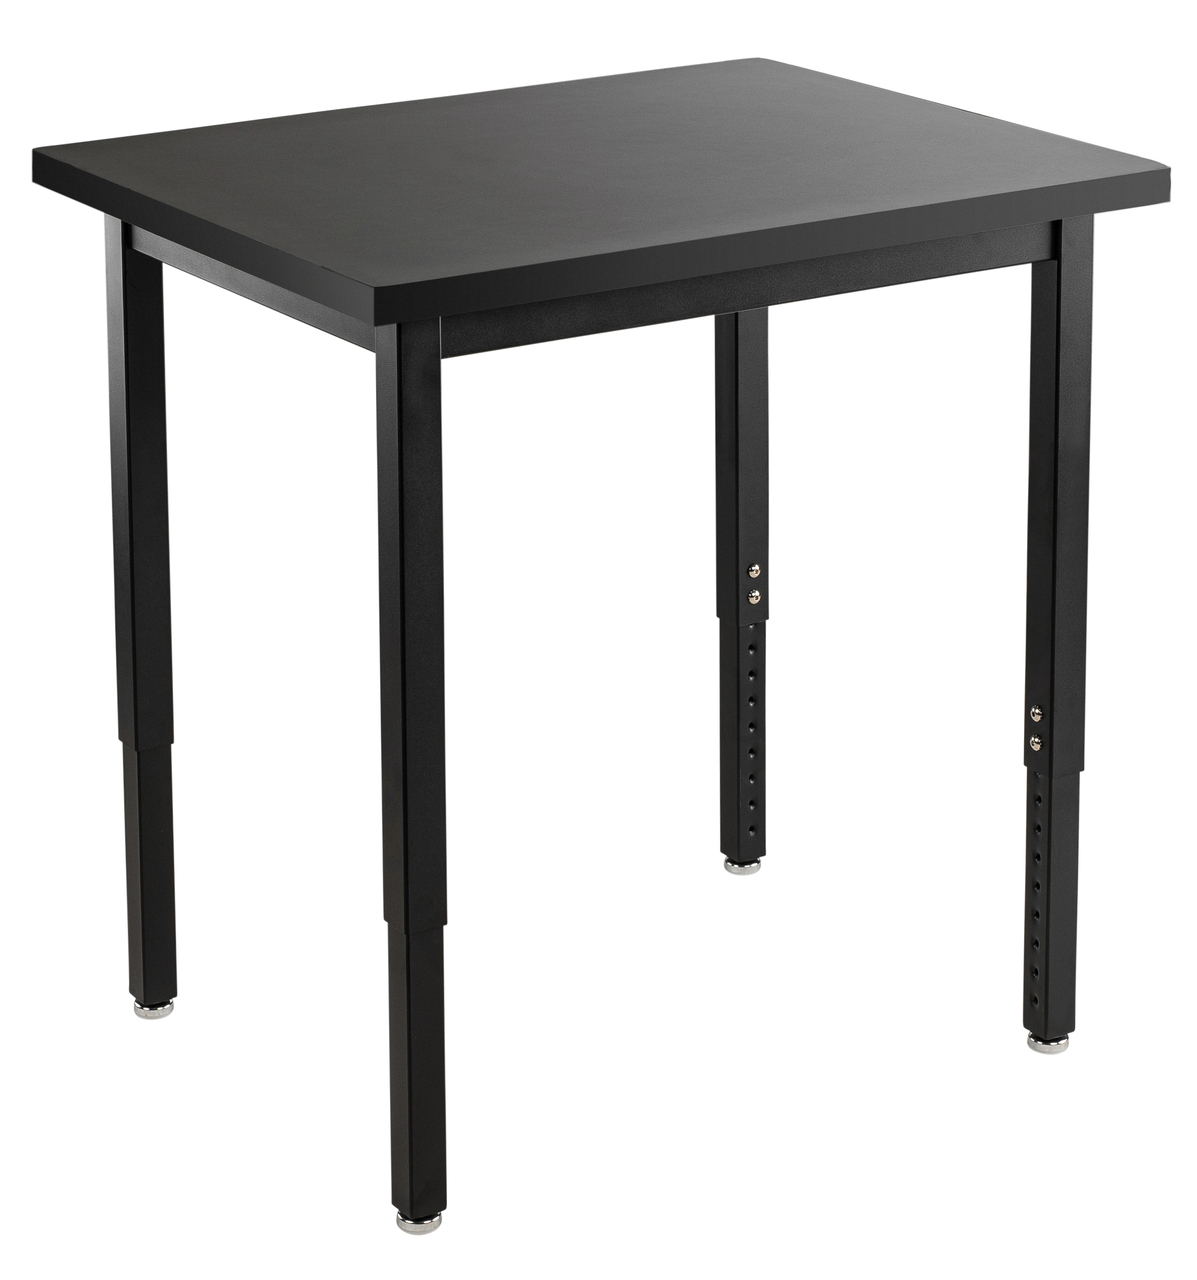 NPS Steel Science Lab Table -  24" x 30" -  Chemical Resistant Top - Black Surface Color